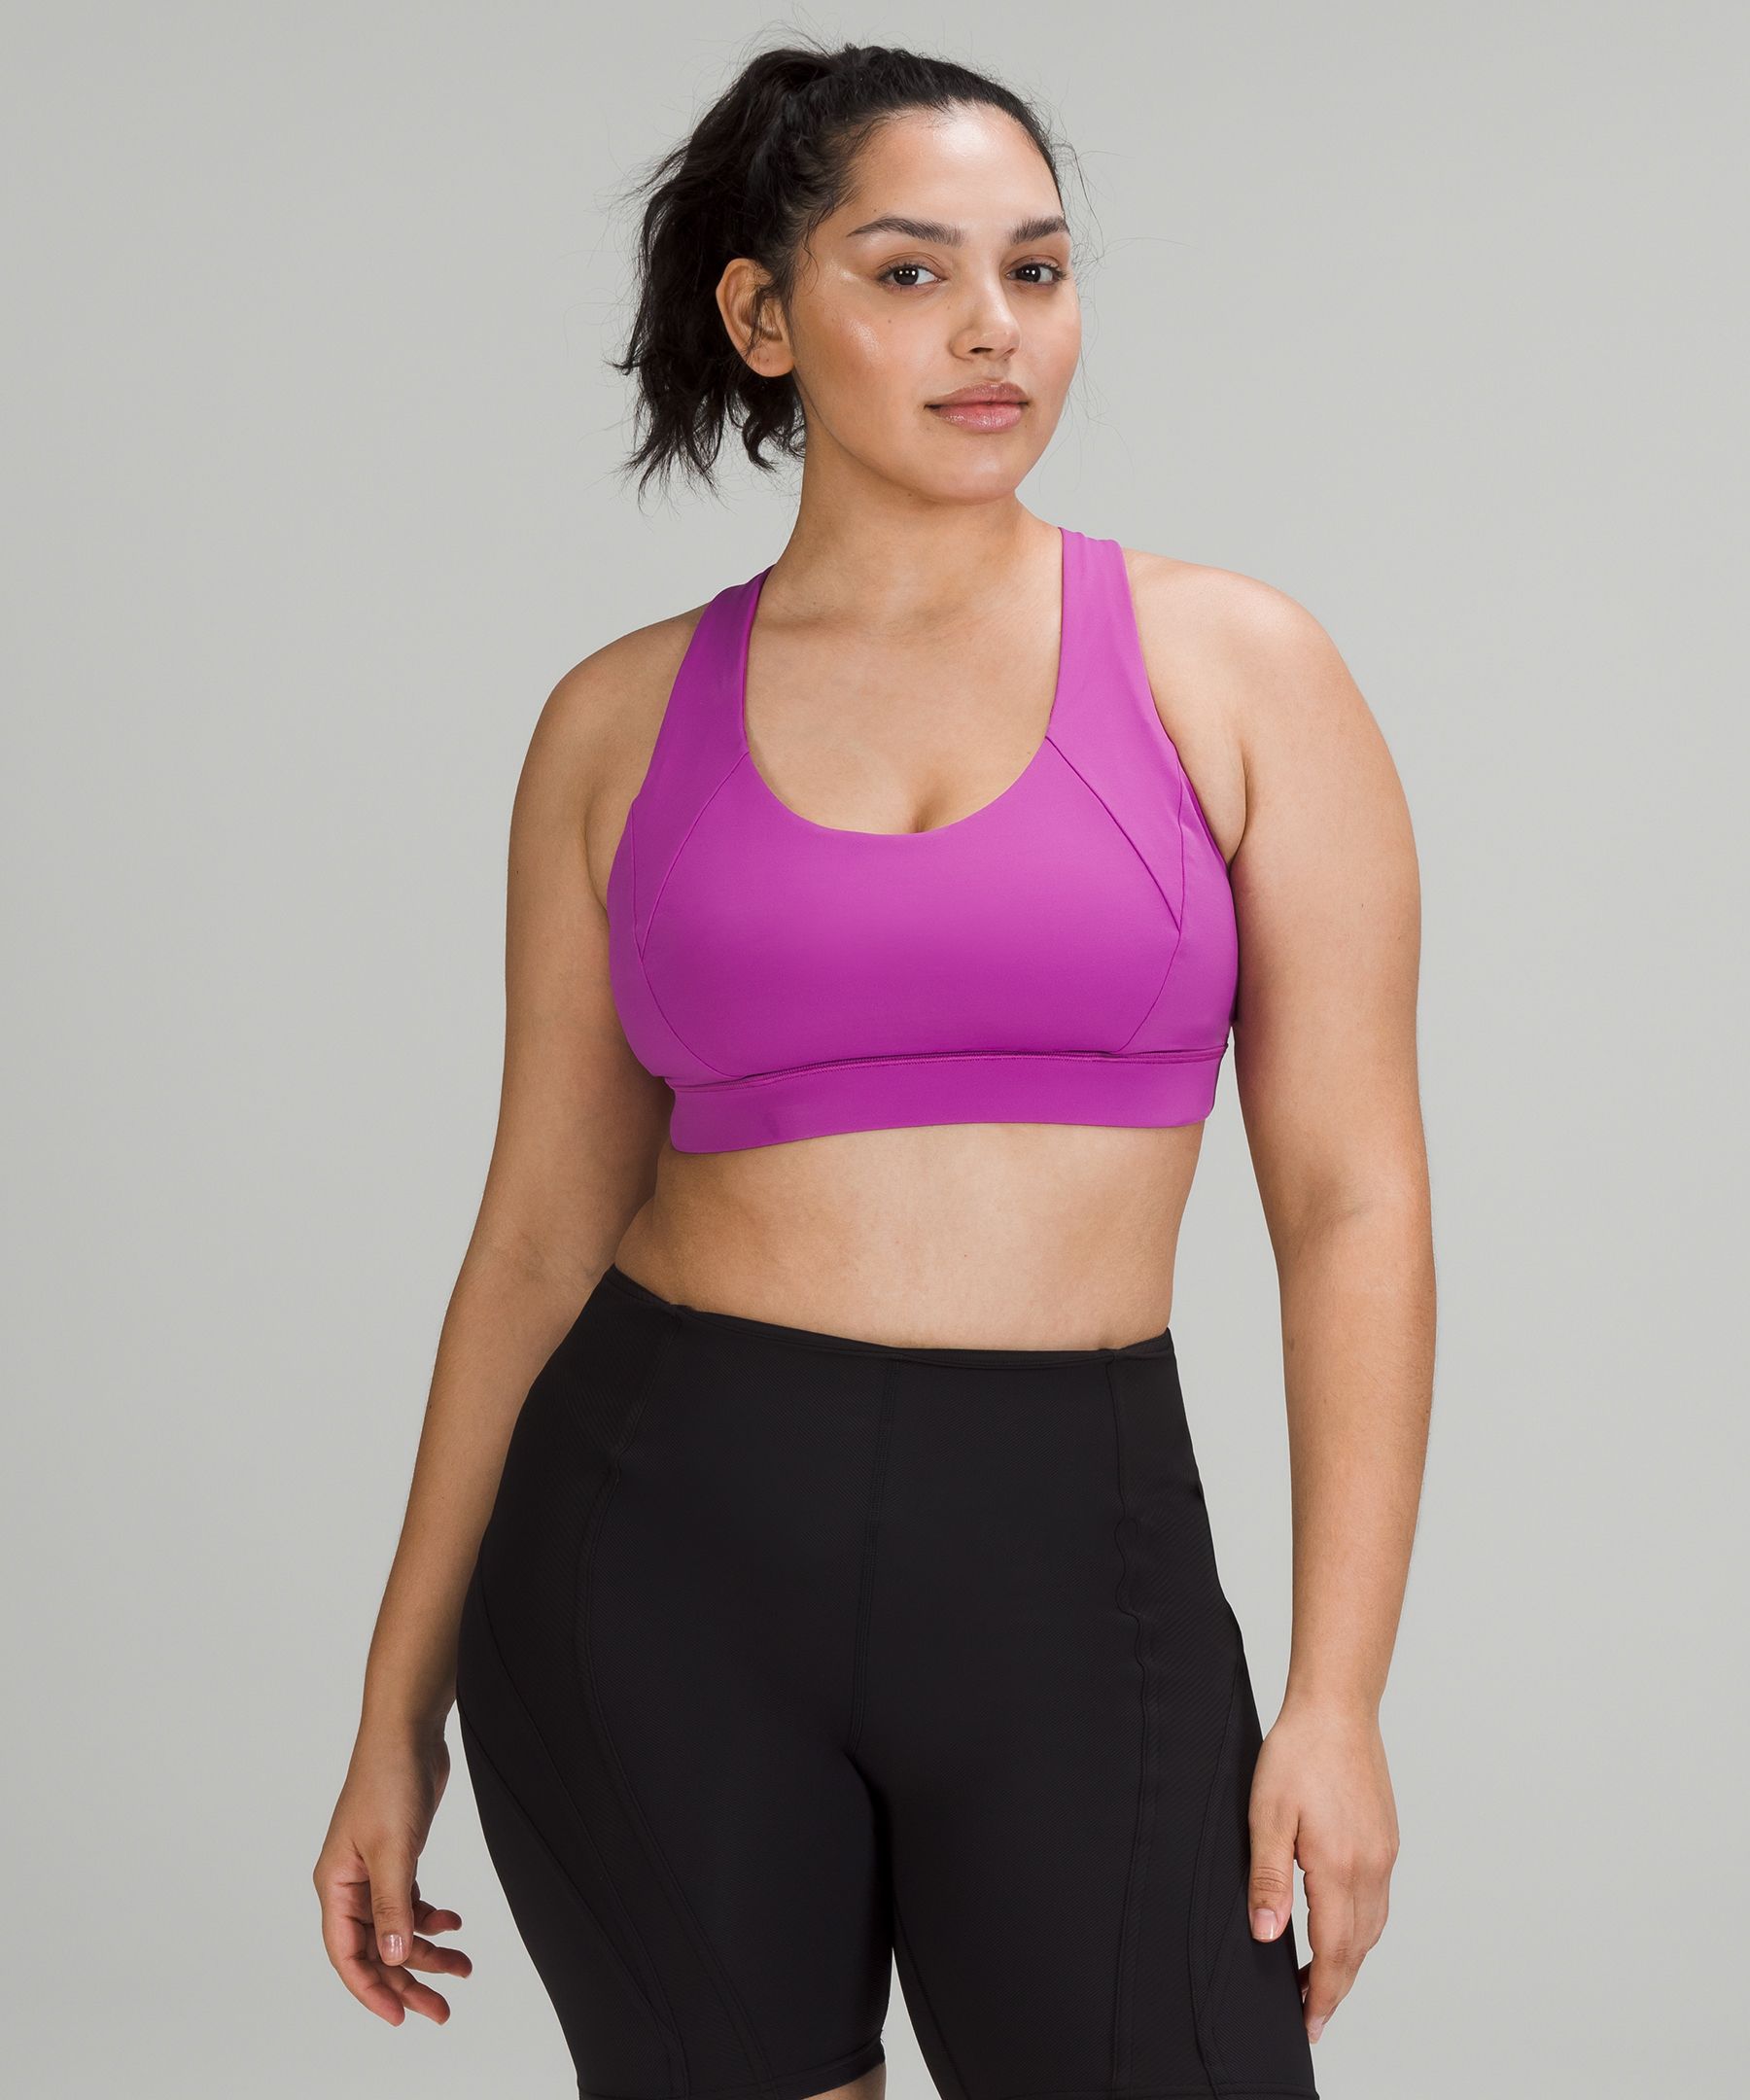 Lululemon Free To Be Elevated Bra Light Support, Dd/ddd(e) Cup In Delicate  Mint